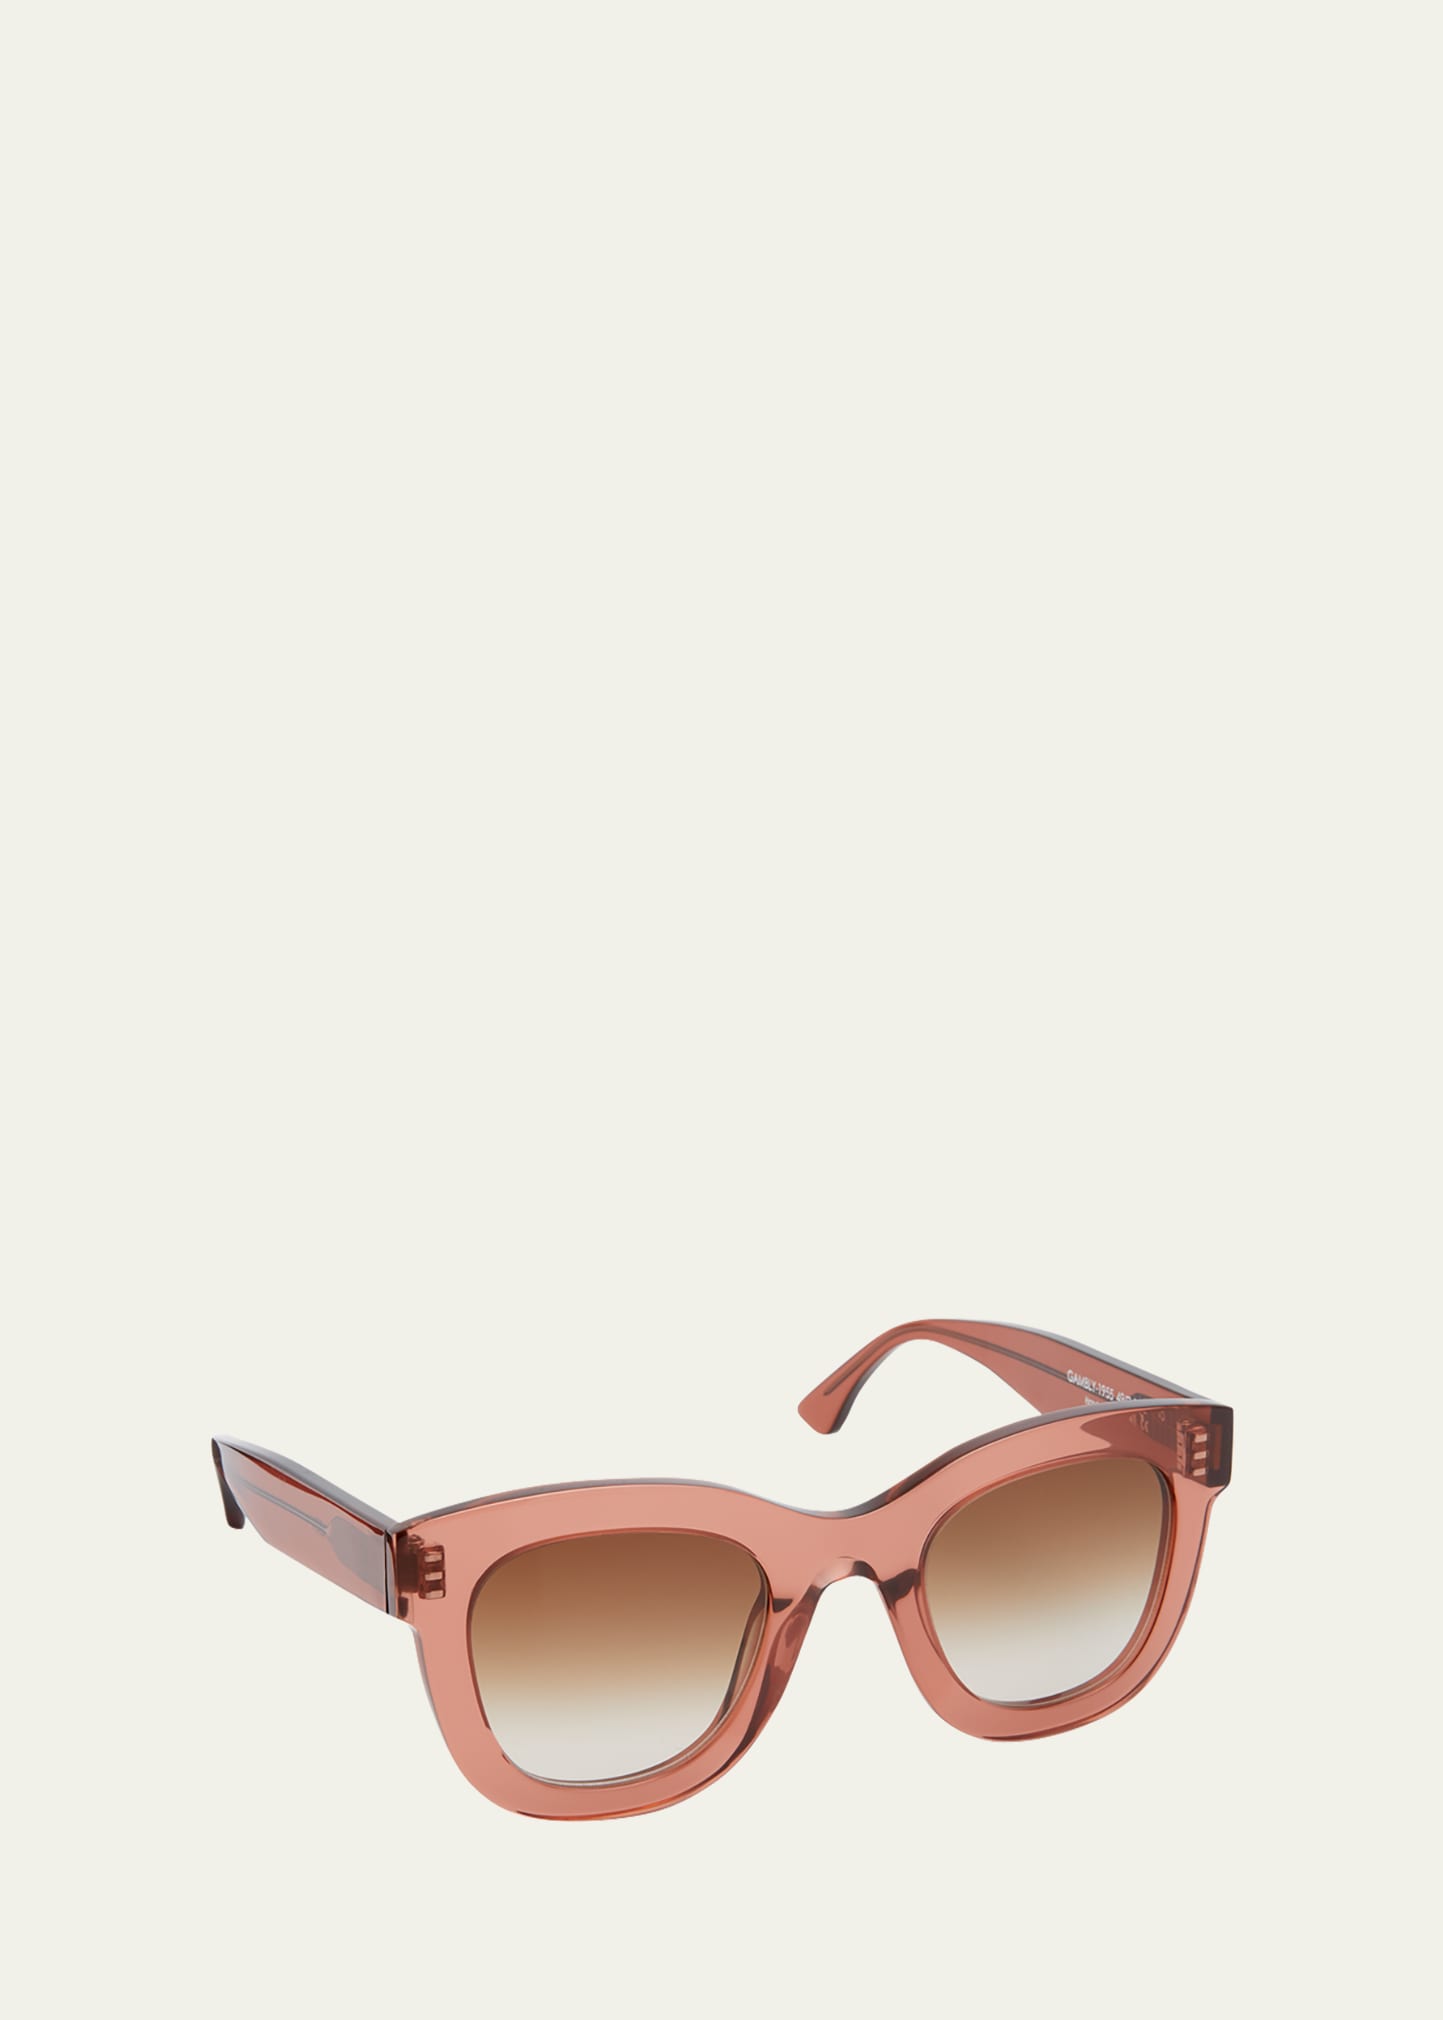 Thierry Lasry Gambly 1955 Rectangle Acetate Sunglasses In Brnsmk